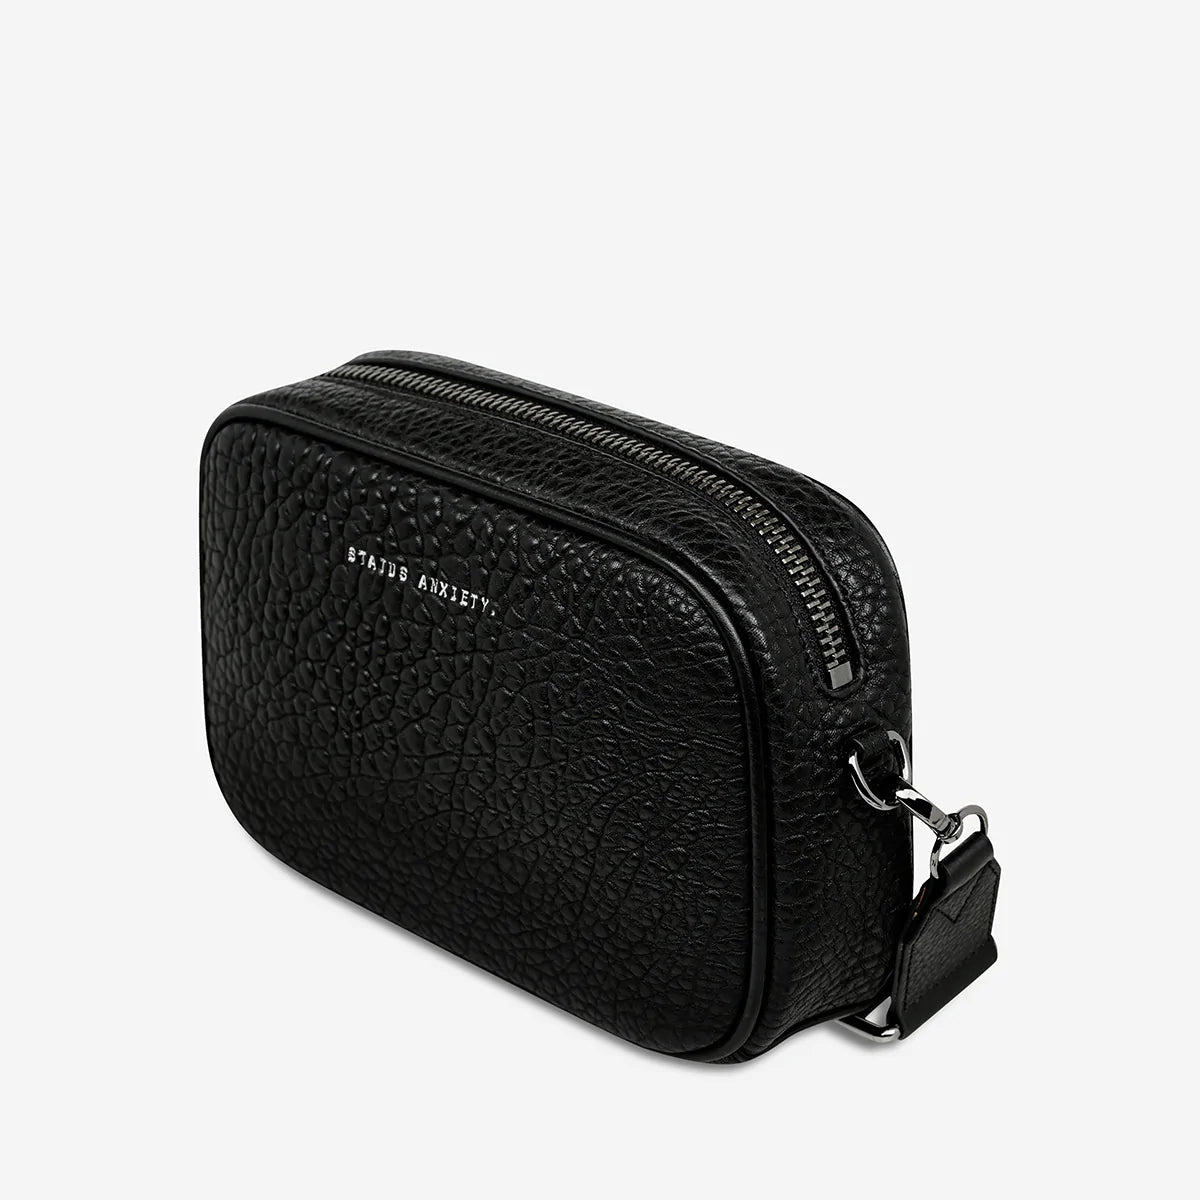 Status Anxiety Bag - Plunder - Black Bubble Leather with Webbed Strap